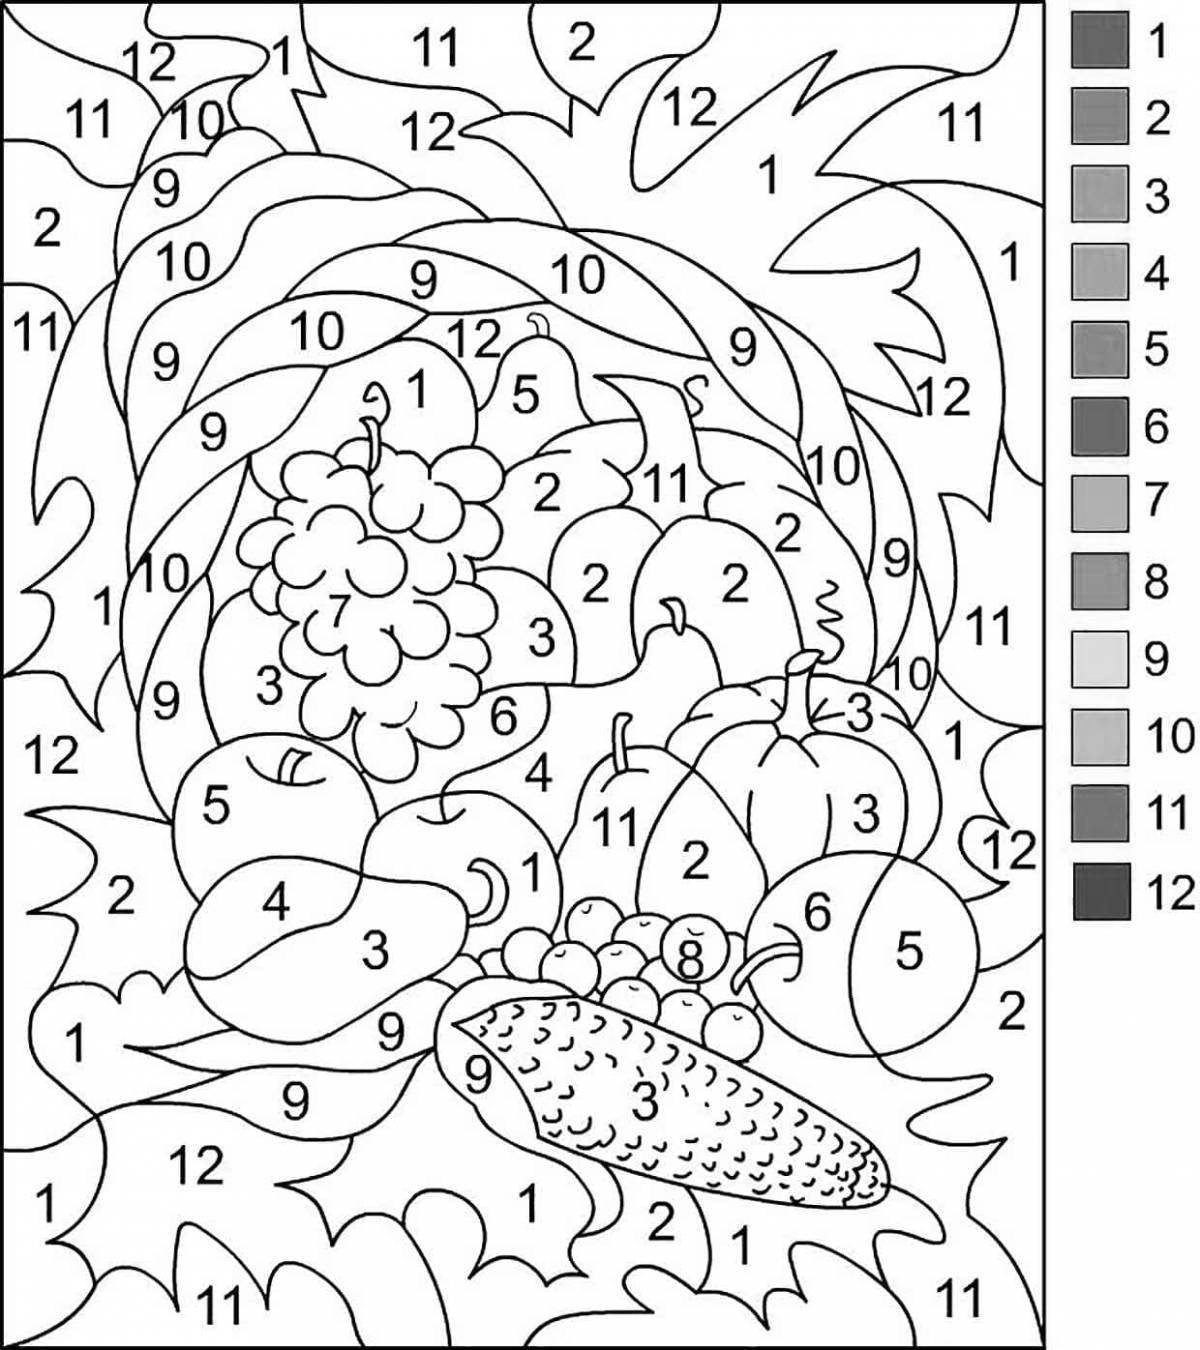 Colorful-delight 7 years by numbers coloring page